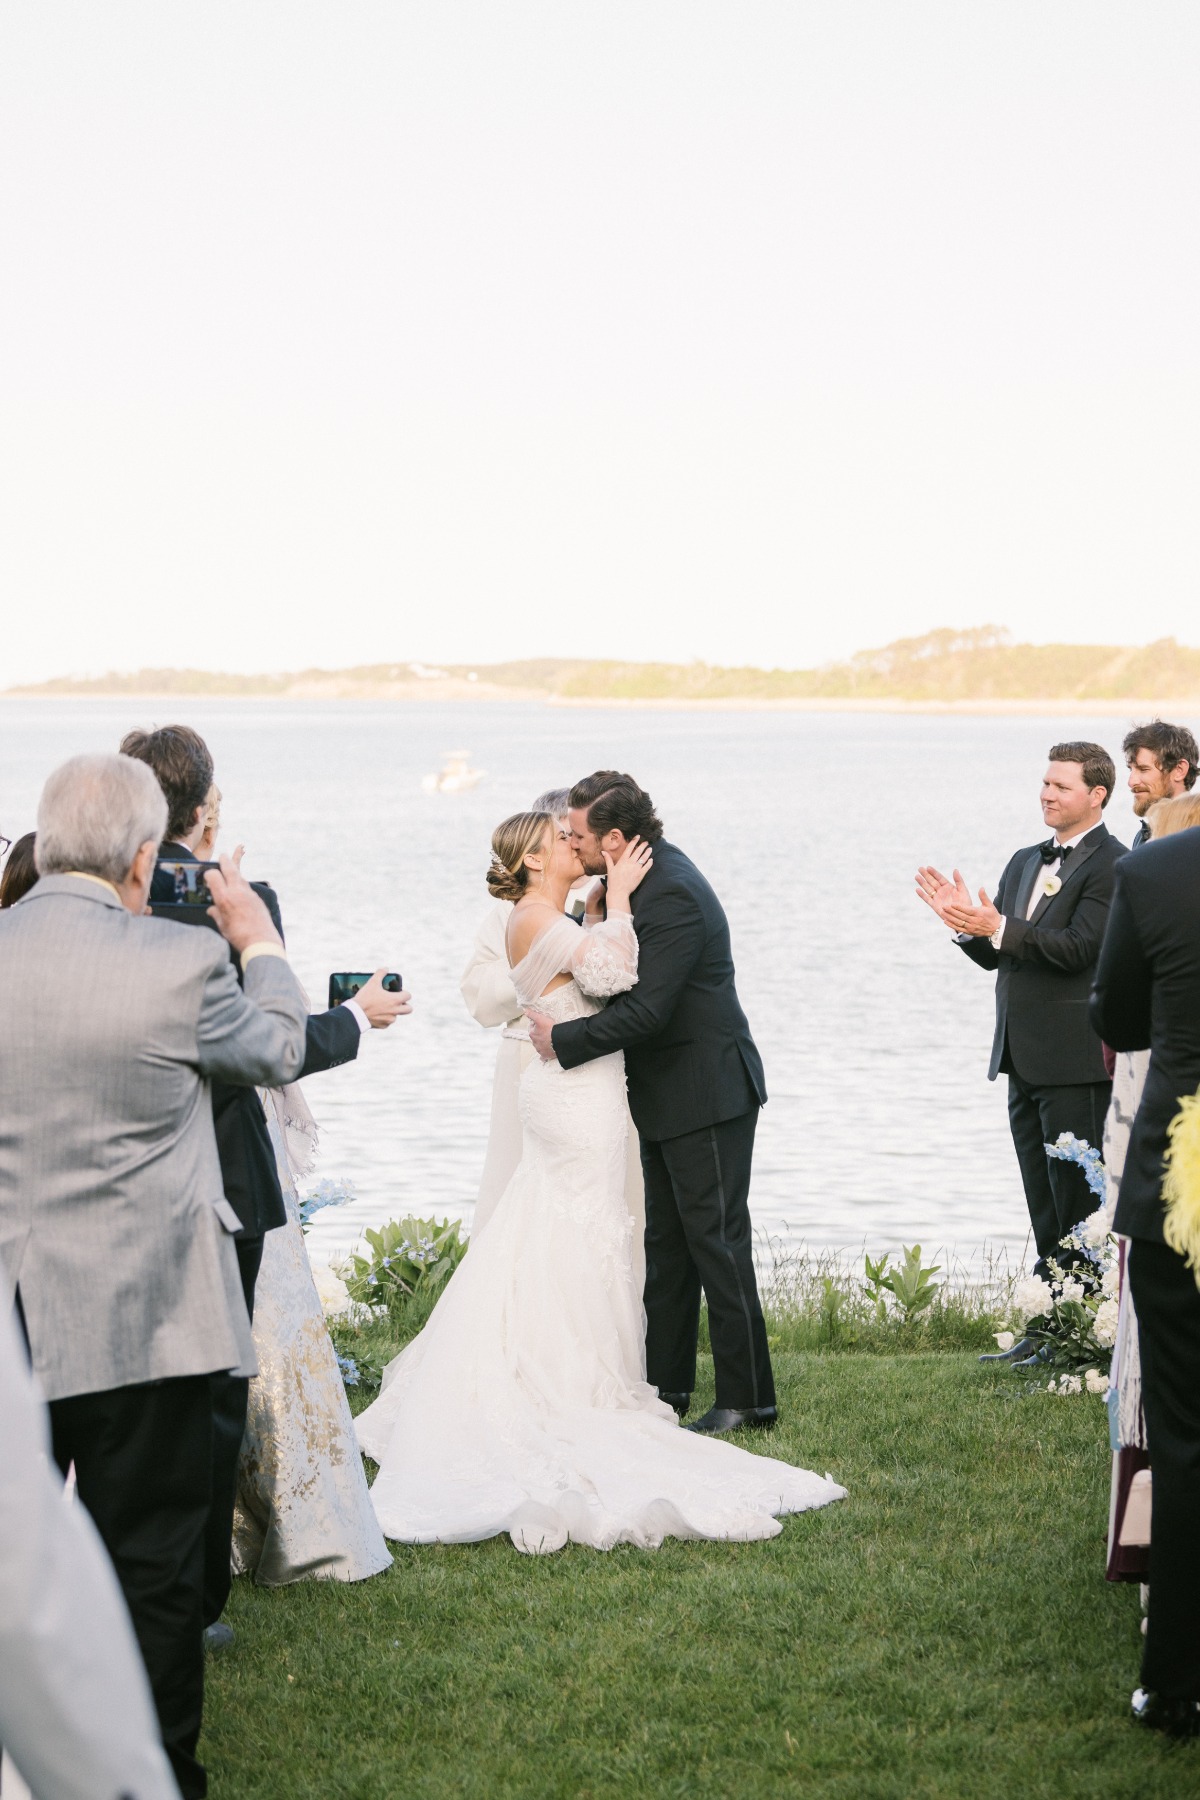 Elegant first kiss at seaside wedding ceremony in Cape Cod